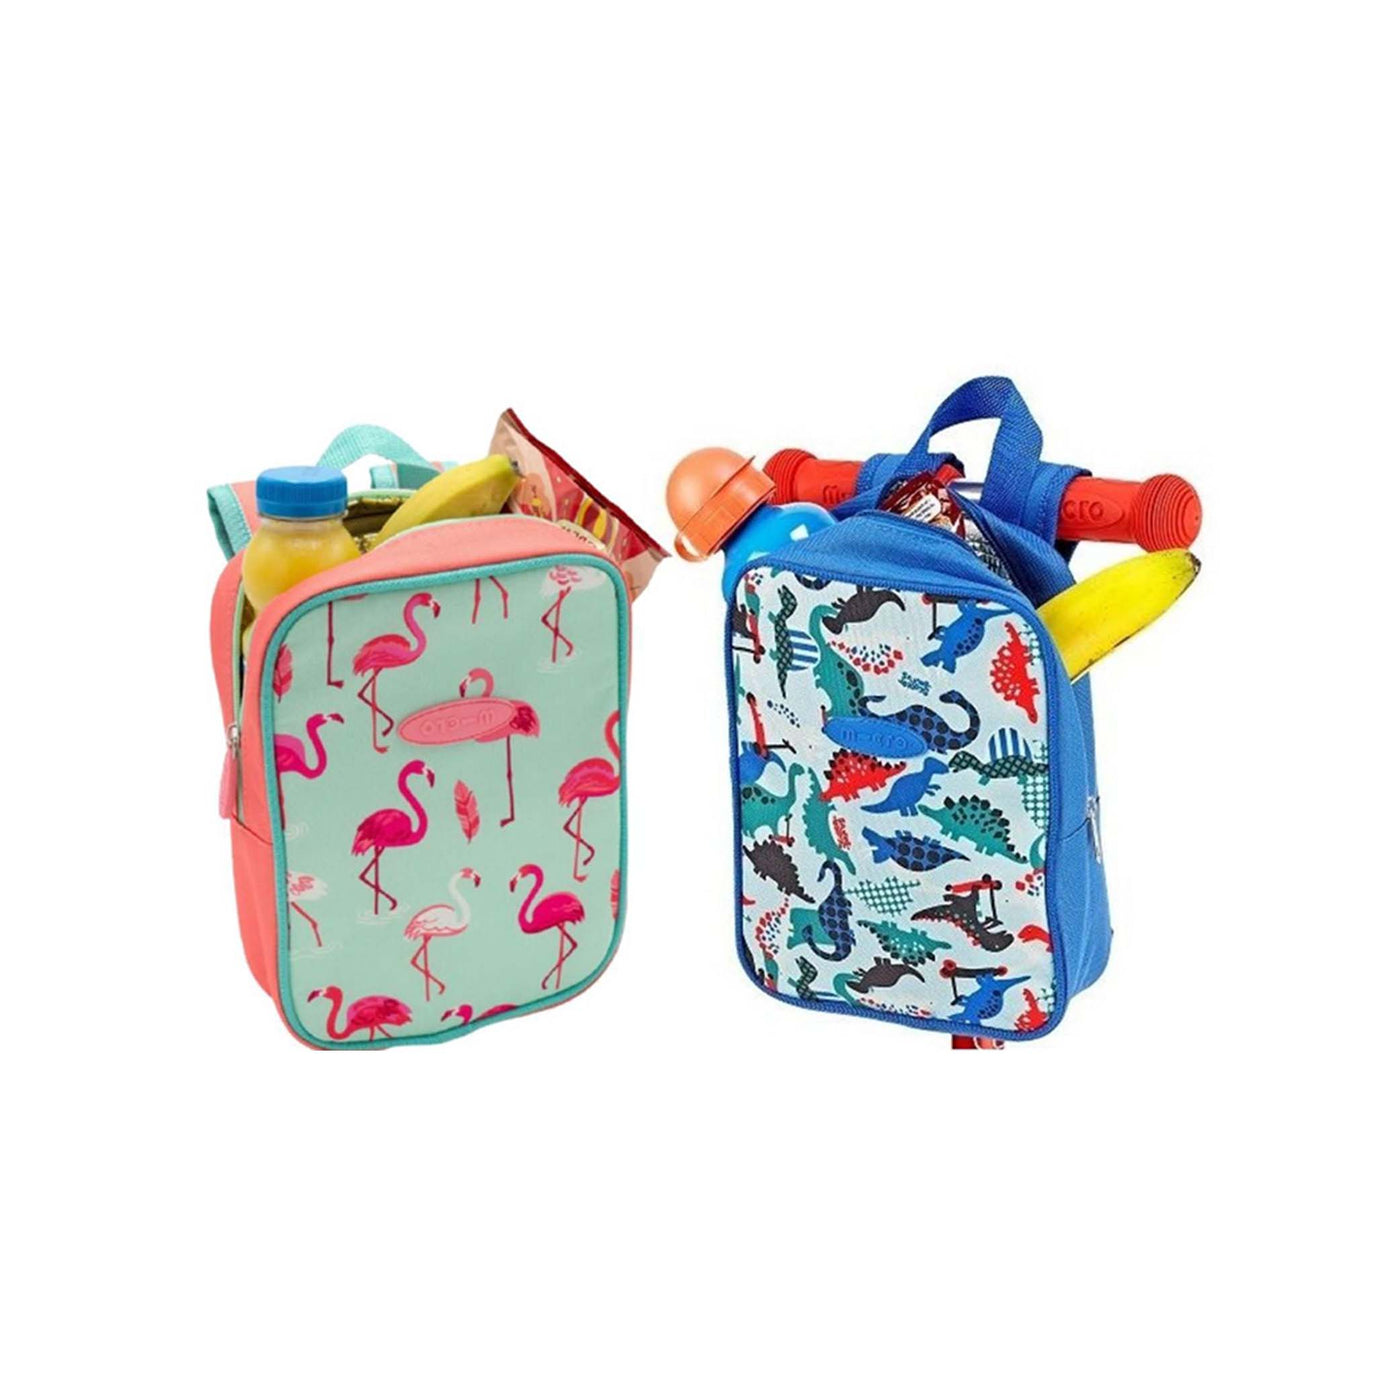 Microscooter lunch bags: Left bag is flamingo print. Right bag has dinosaur print. 